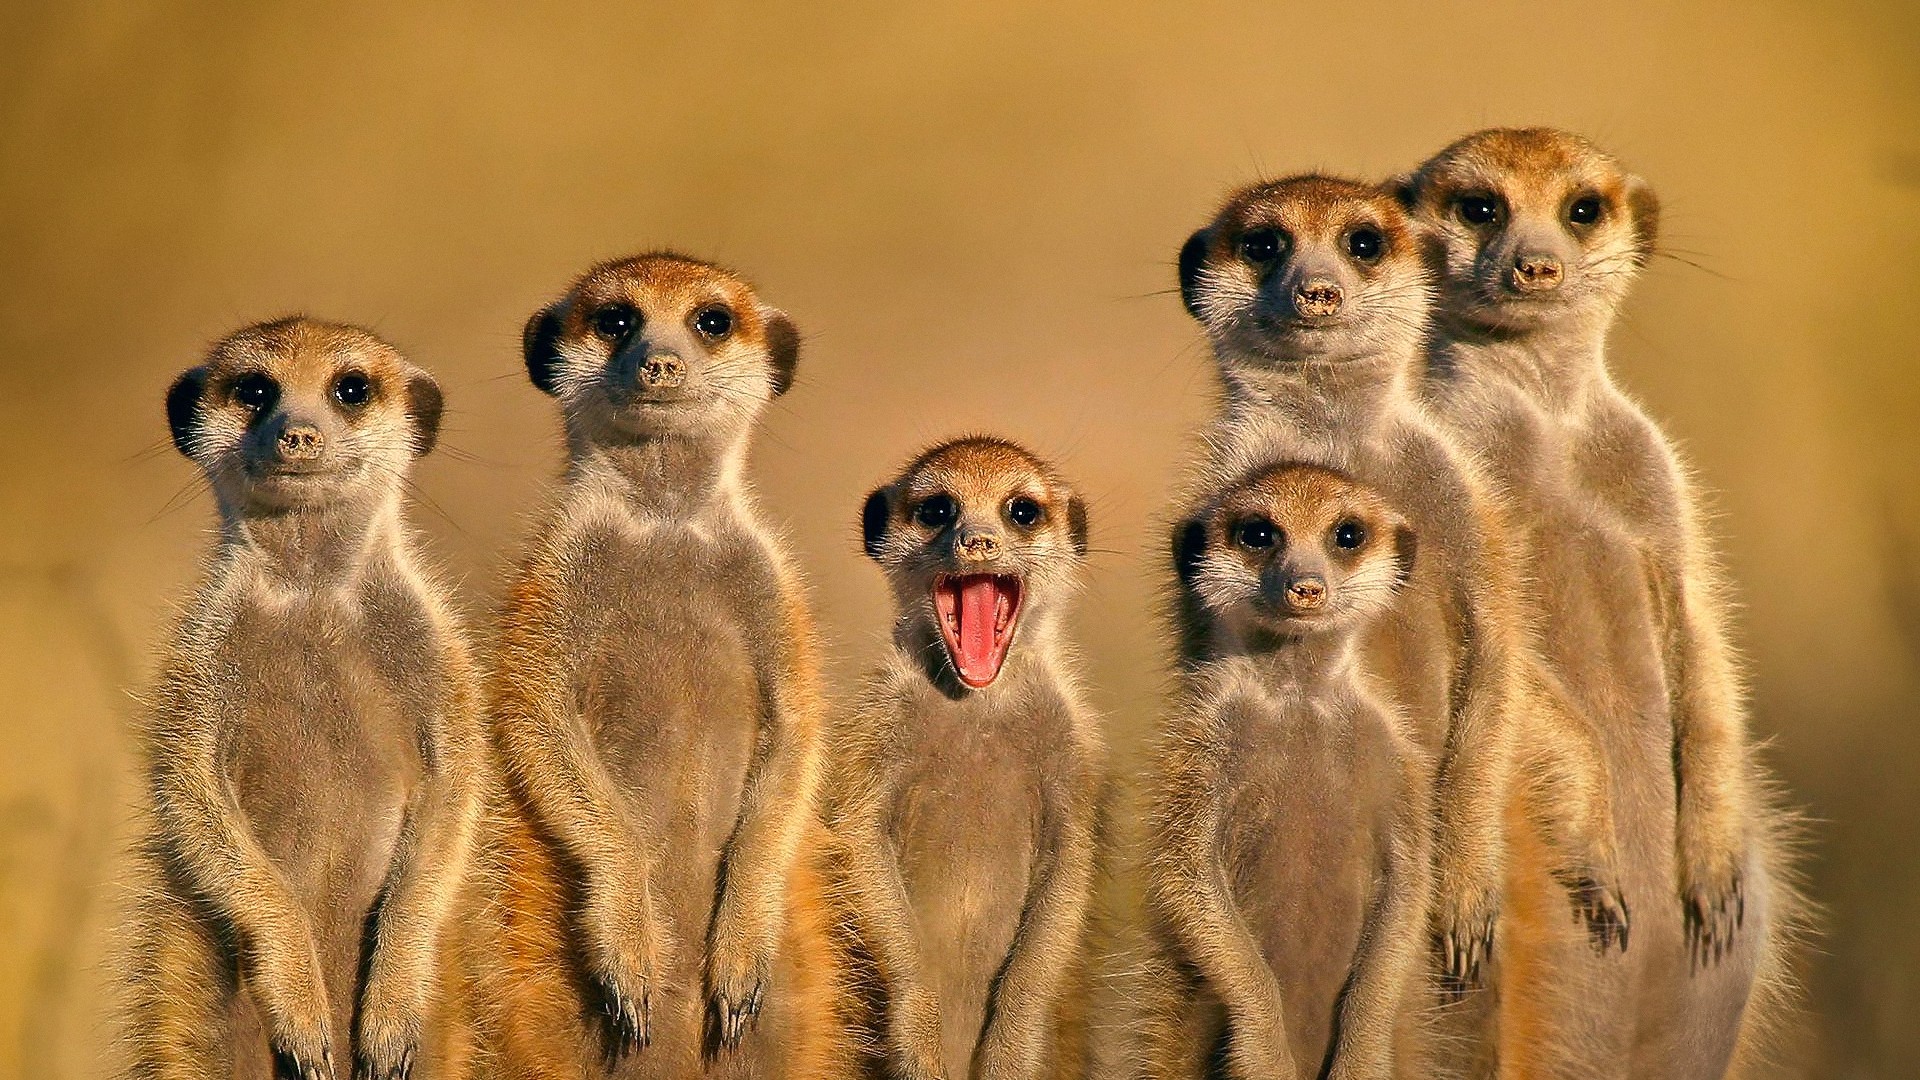 General 1920x1080 meerkats animals nature family face open mouth mammals simple background